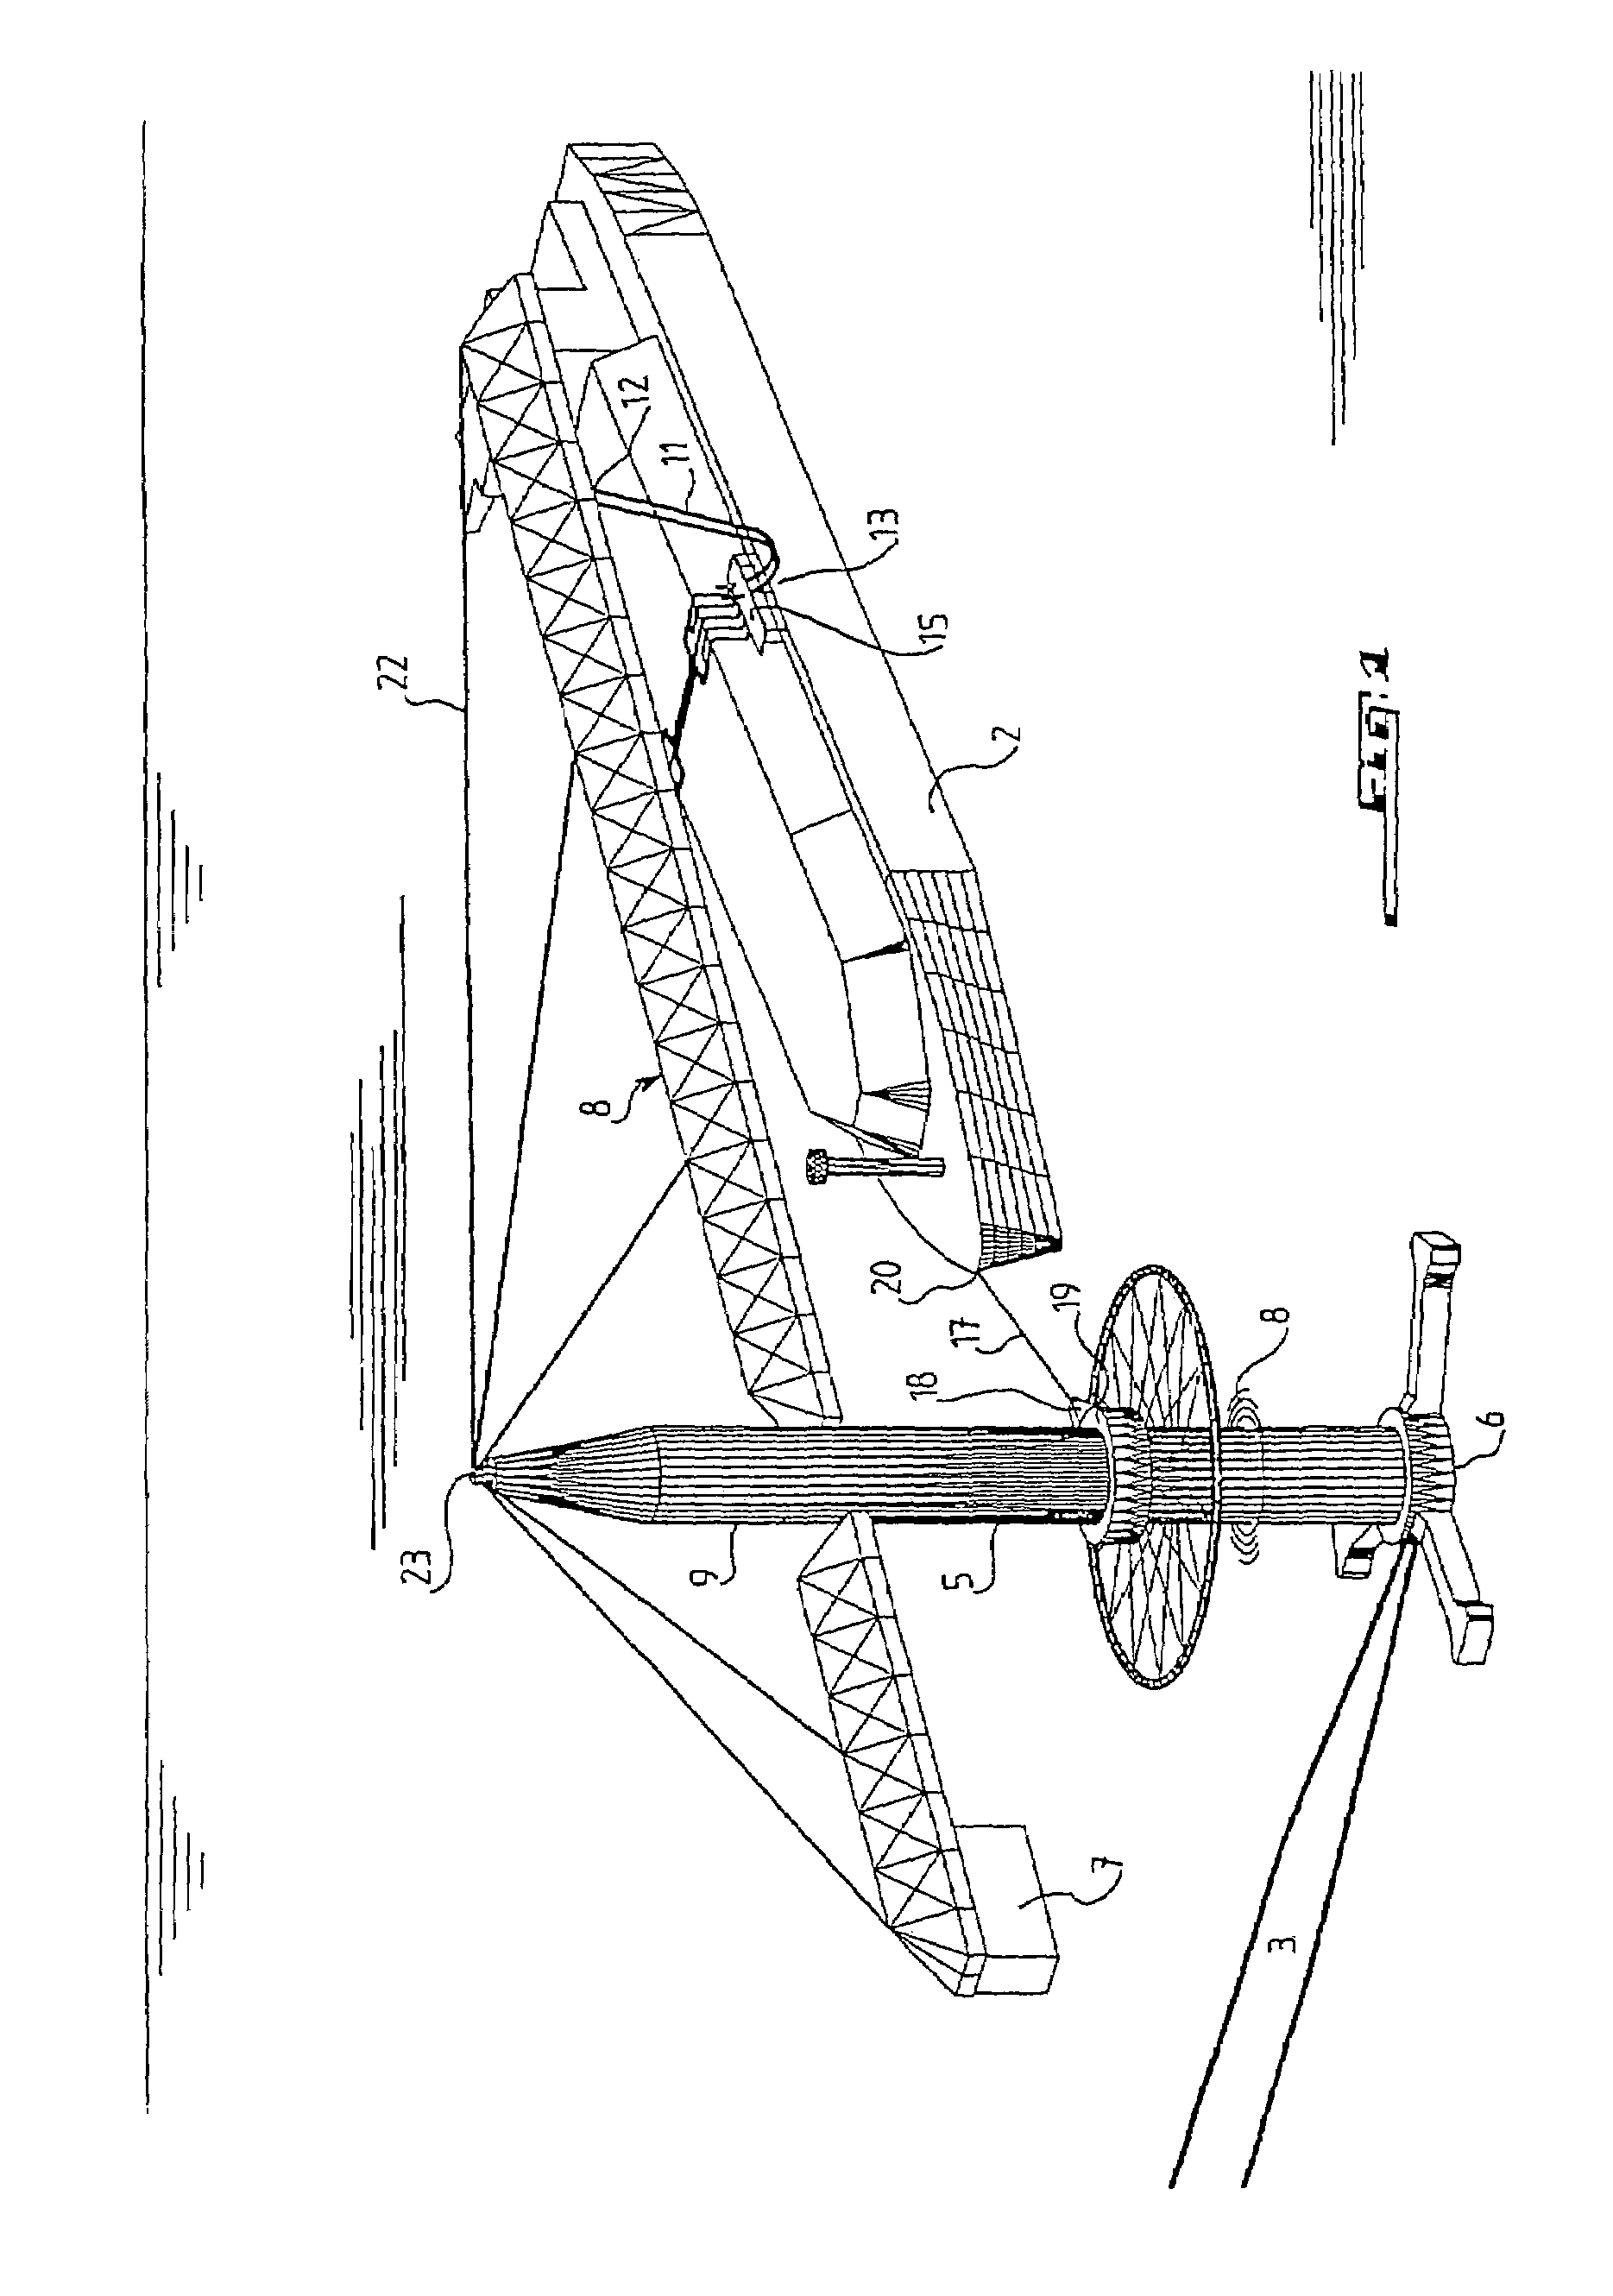 System for transfer of a fluid product, particularly liquefied natural gas, between a transport vehicle, such as a ship, and an installation for receiving or supplying this product